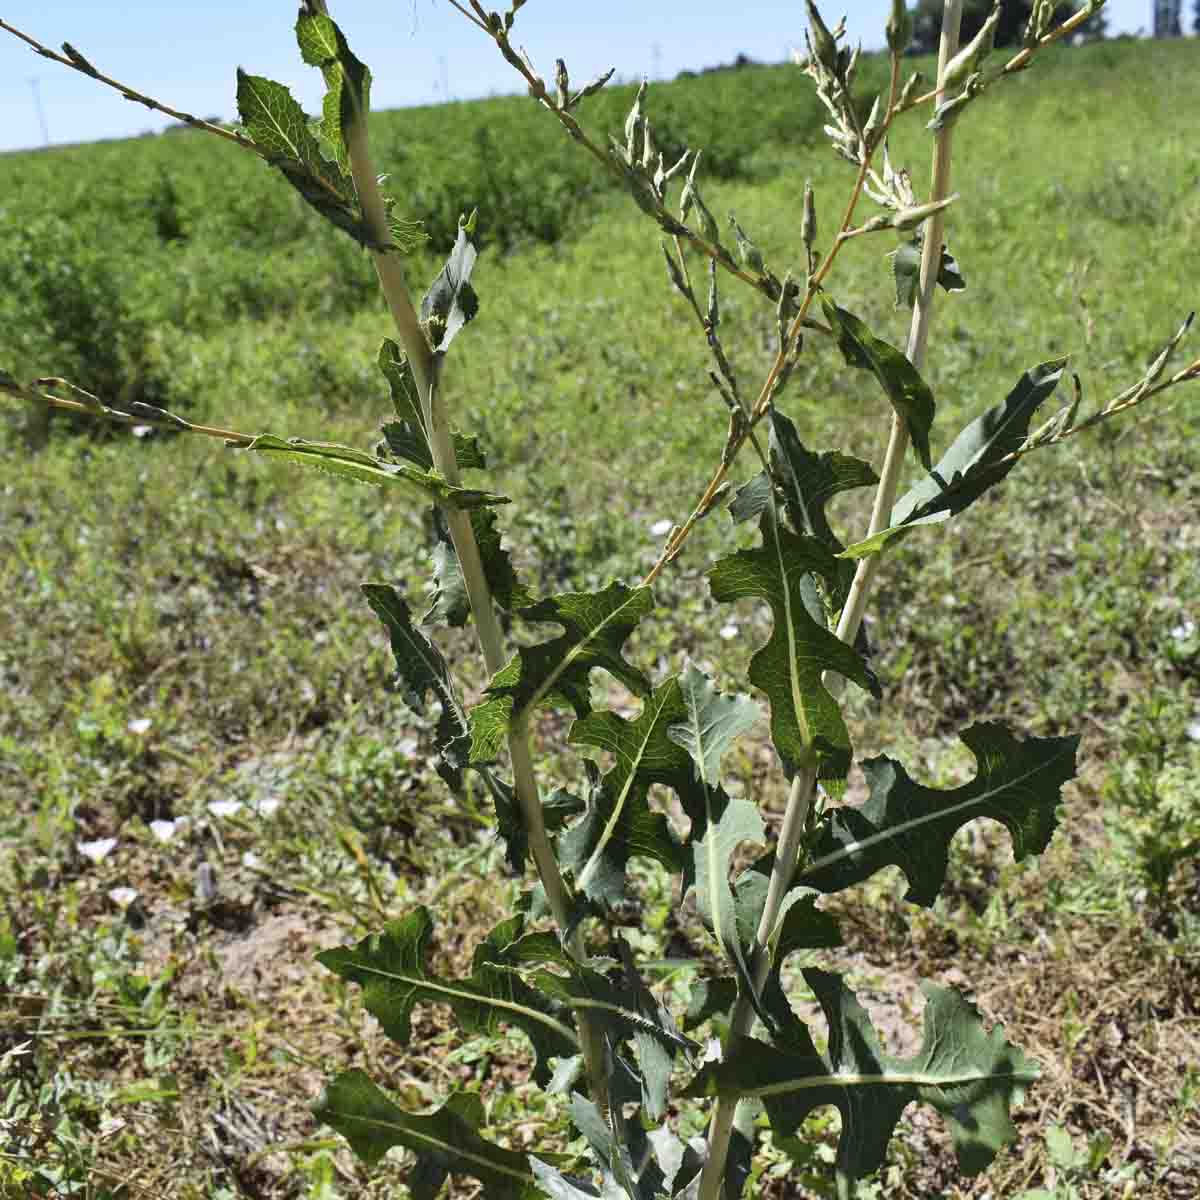 Prickly lettuce found on University of Idaho Kimberly Research and Extension Center's farm